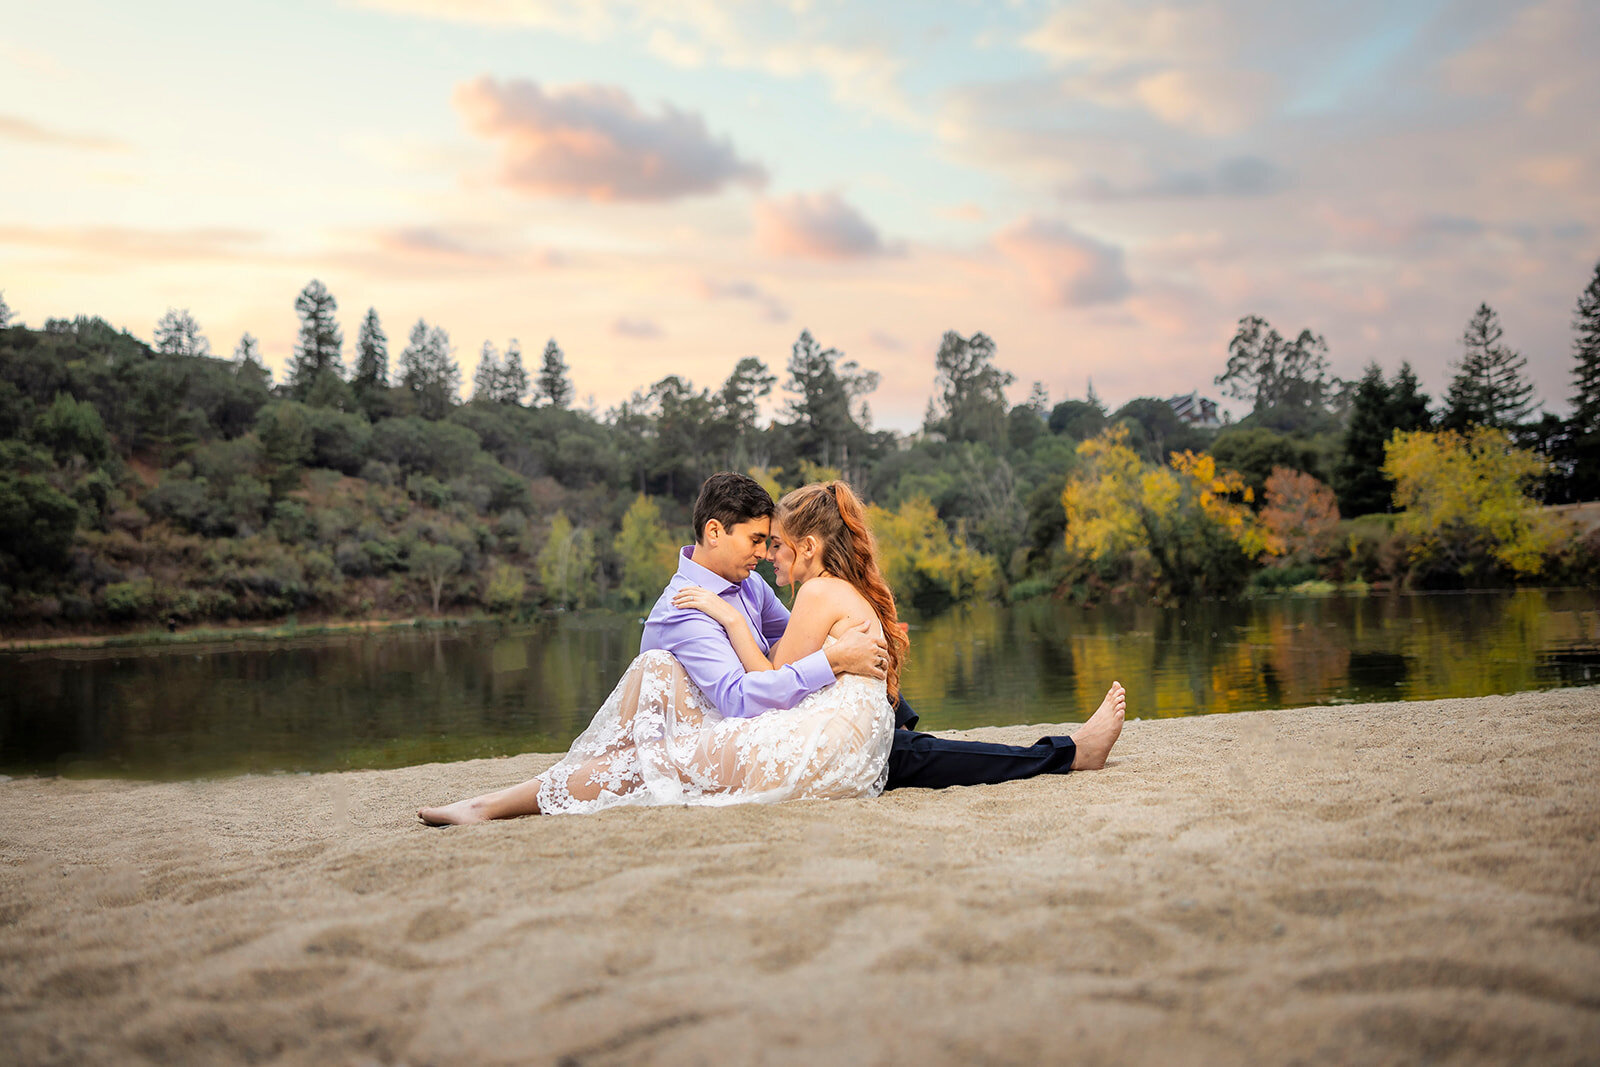 Engaged couple sit on the beach in front of a lake and press their foreheads together smiling. Photo by wedding photographer studio in Sacramento, Philippe Studio Pro.